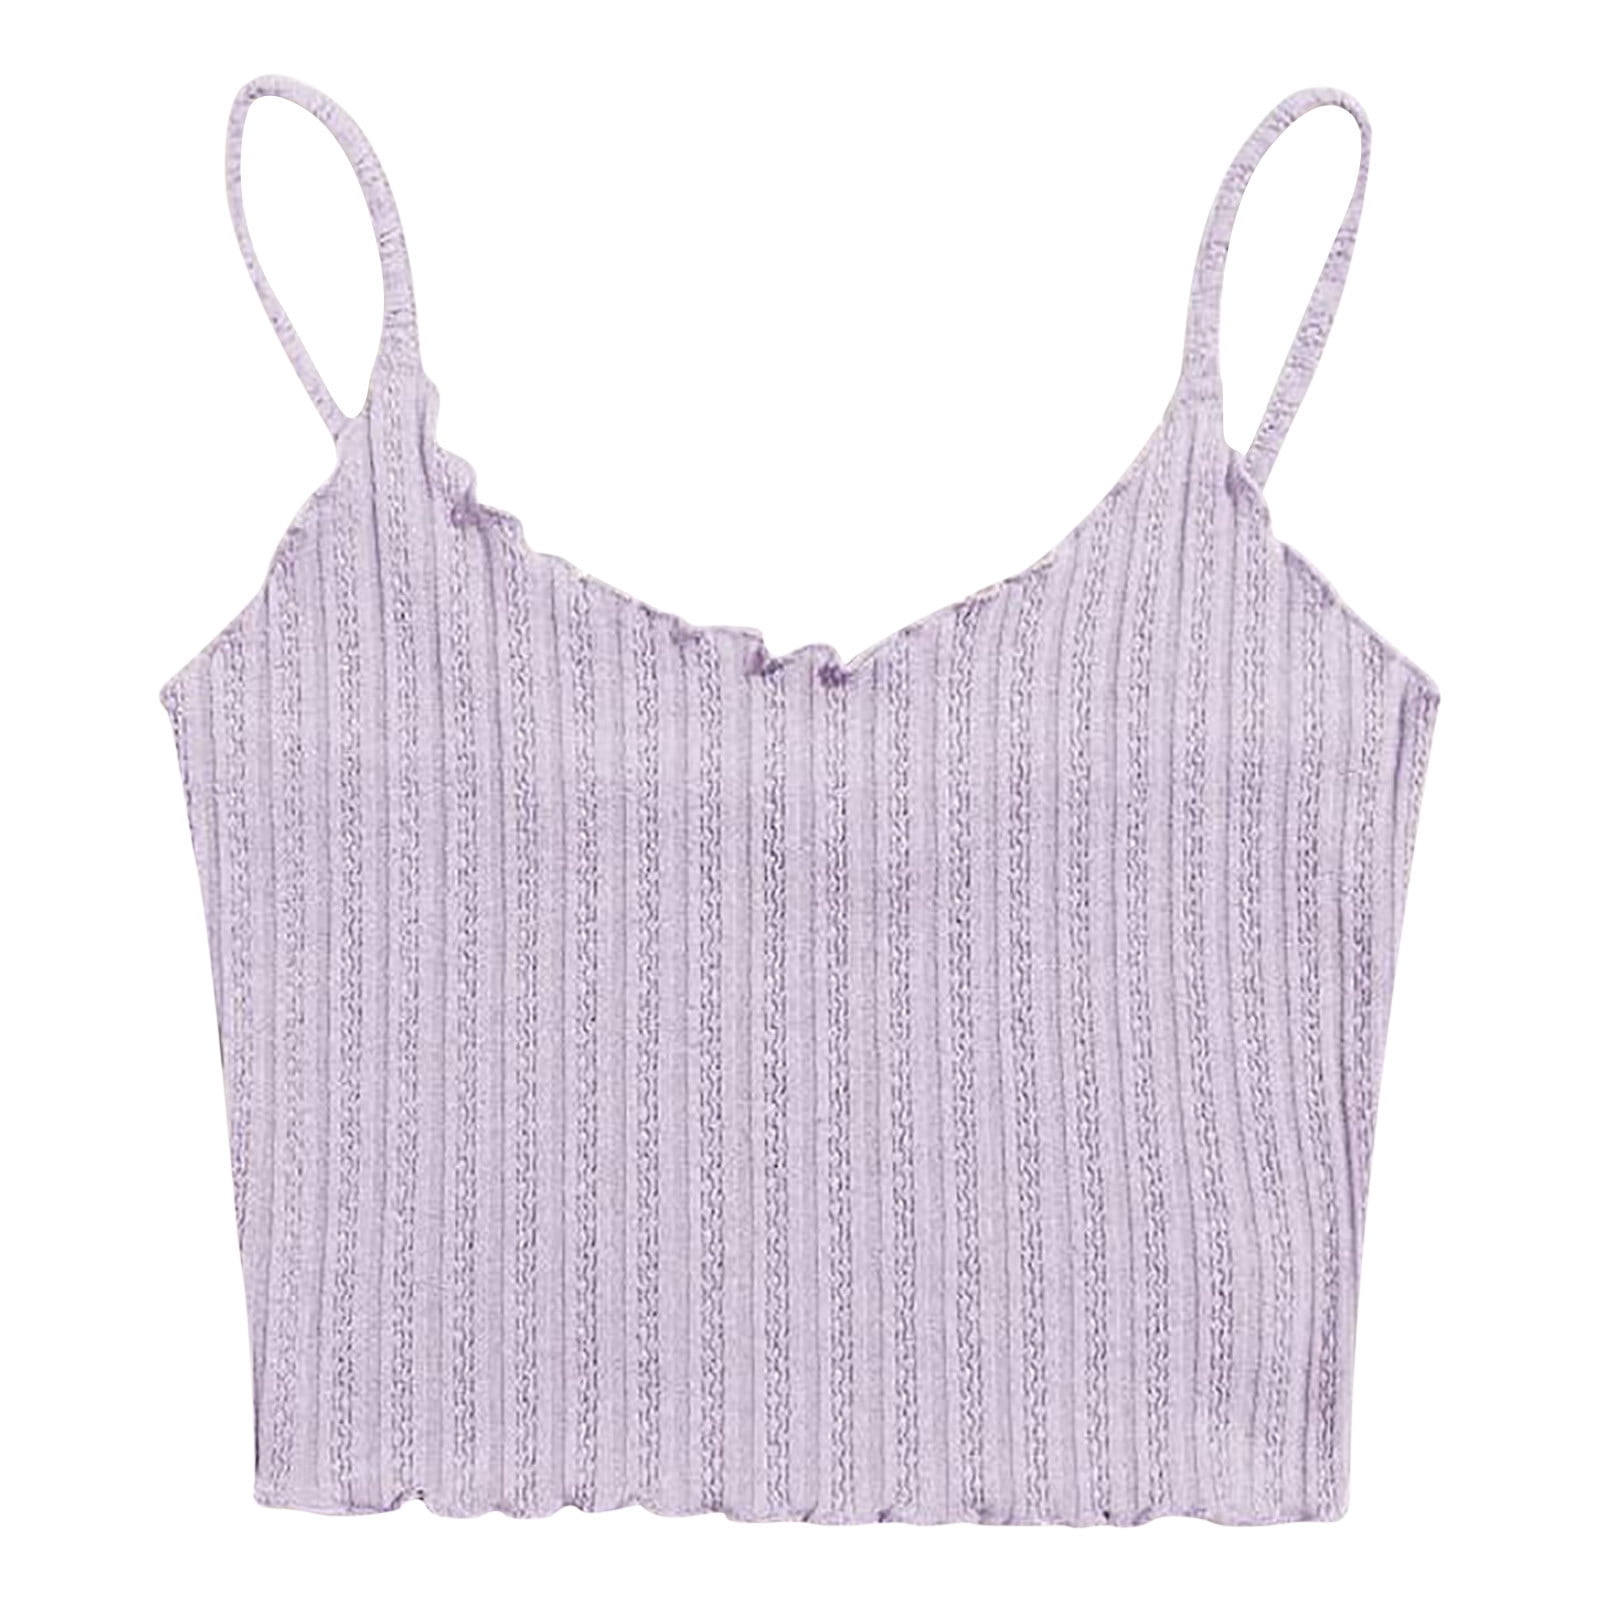 Cropped Tank Tops for Women Spaghetti Strap Crop Top Basic Sports Cami ...